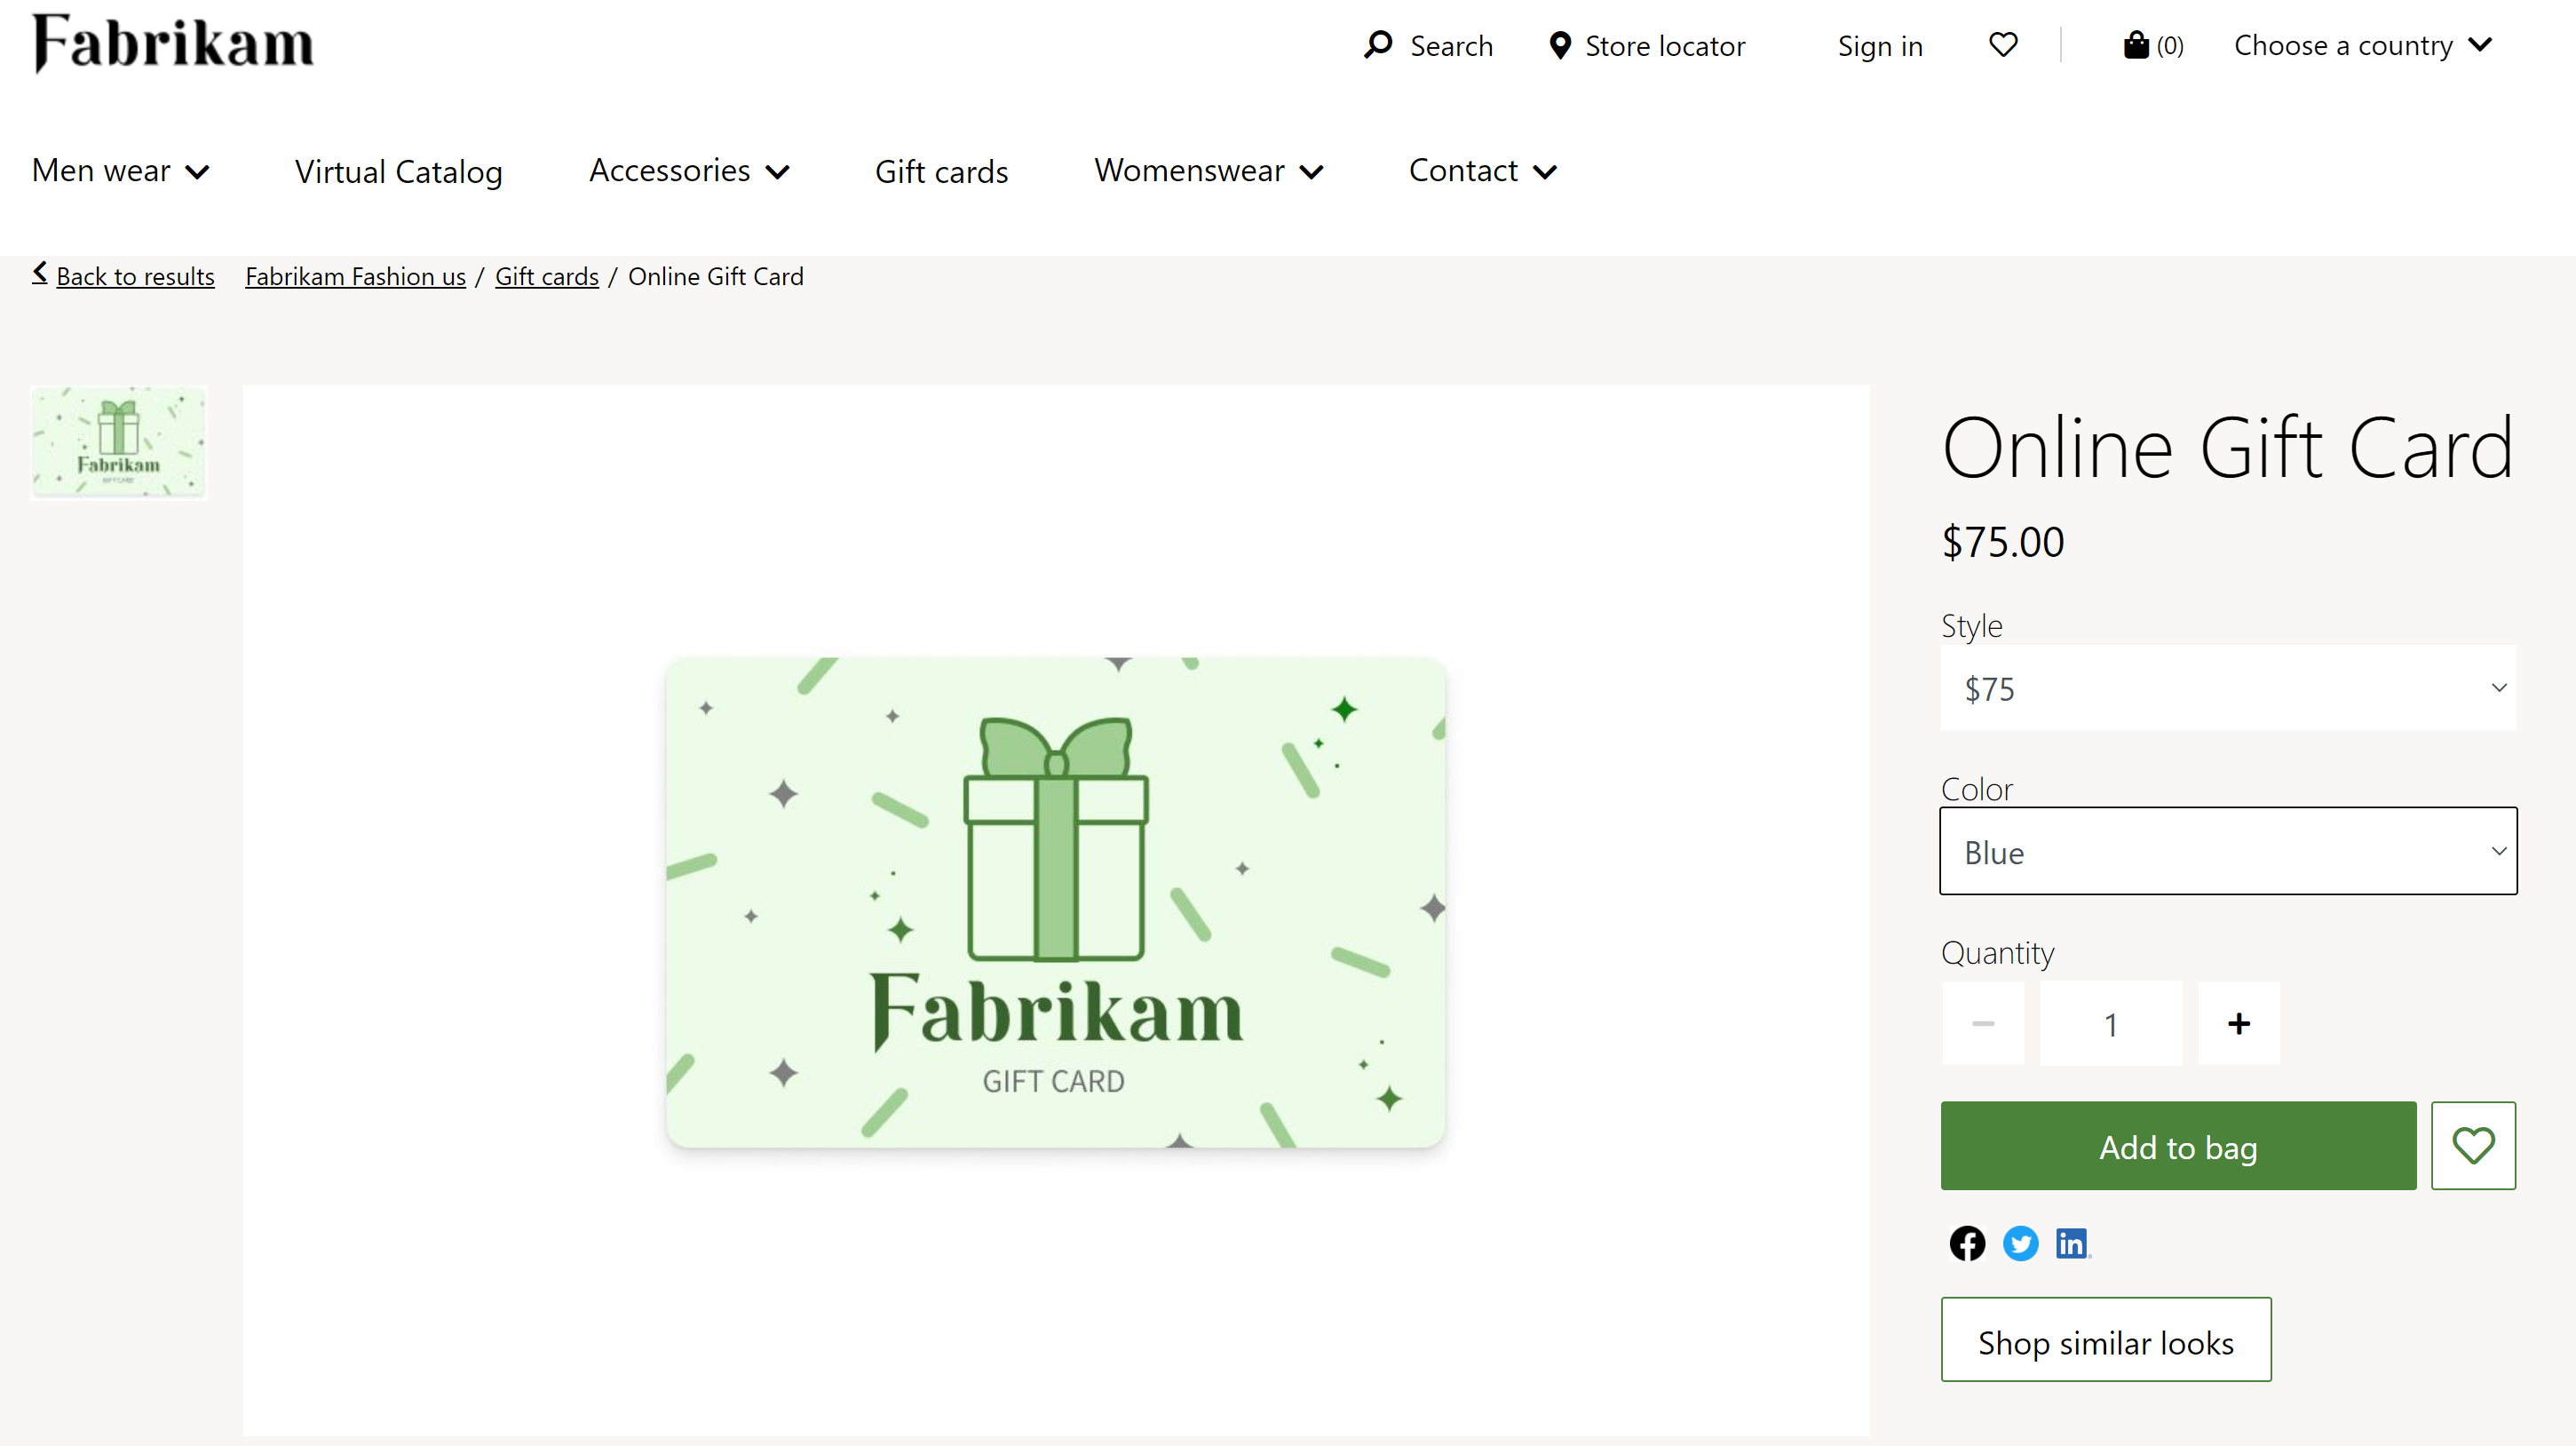 Example of a digital gift card PDP on the Fabrikam e-commerce site.